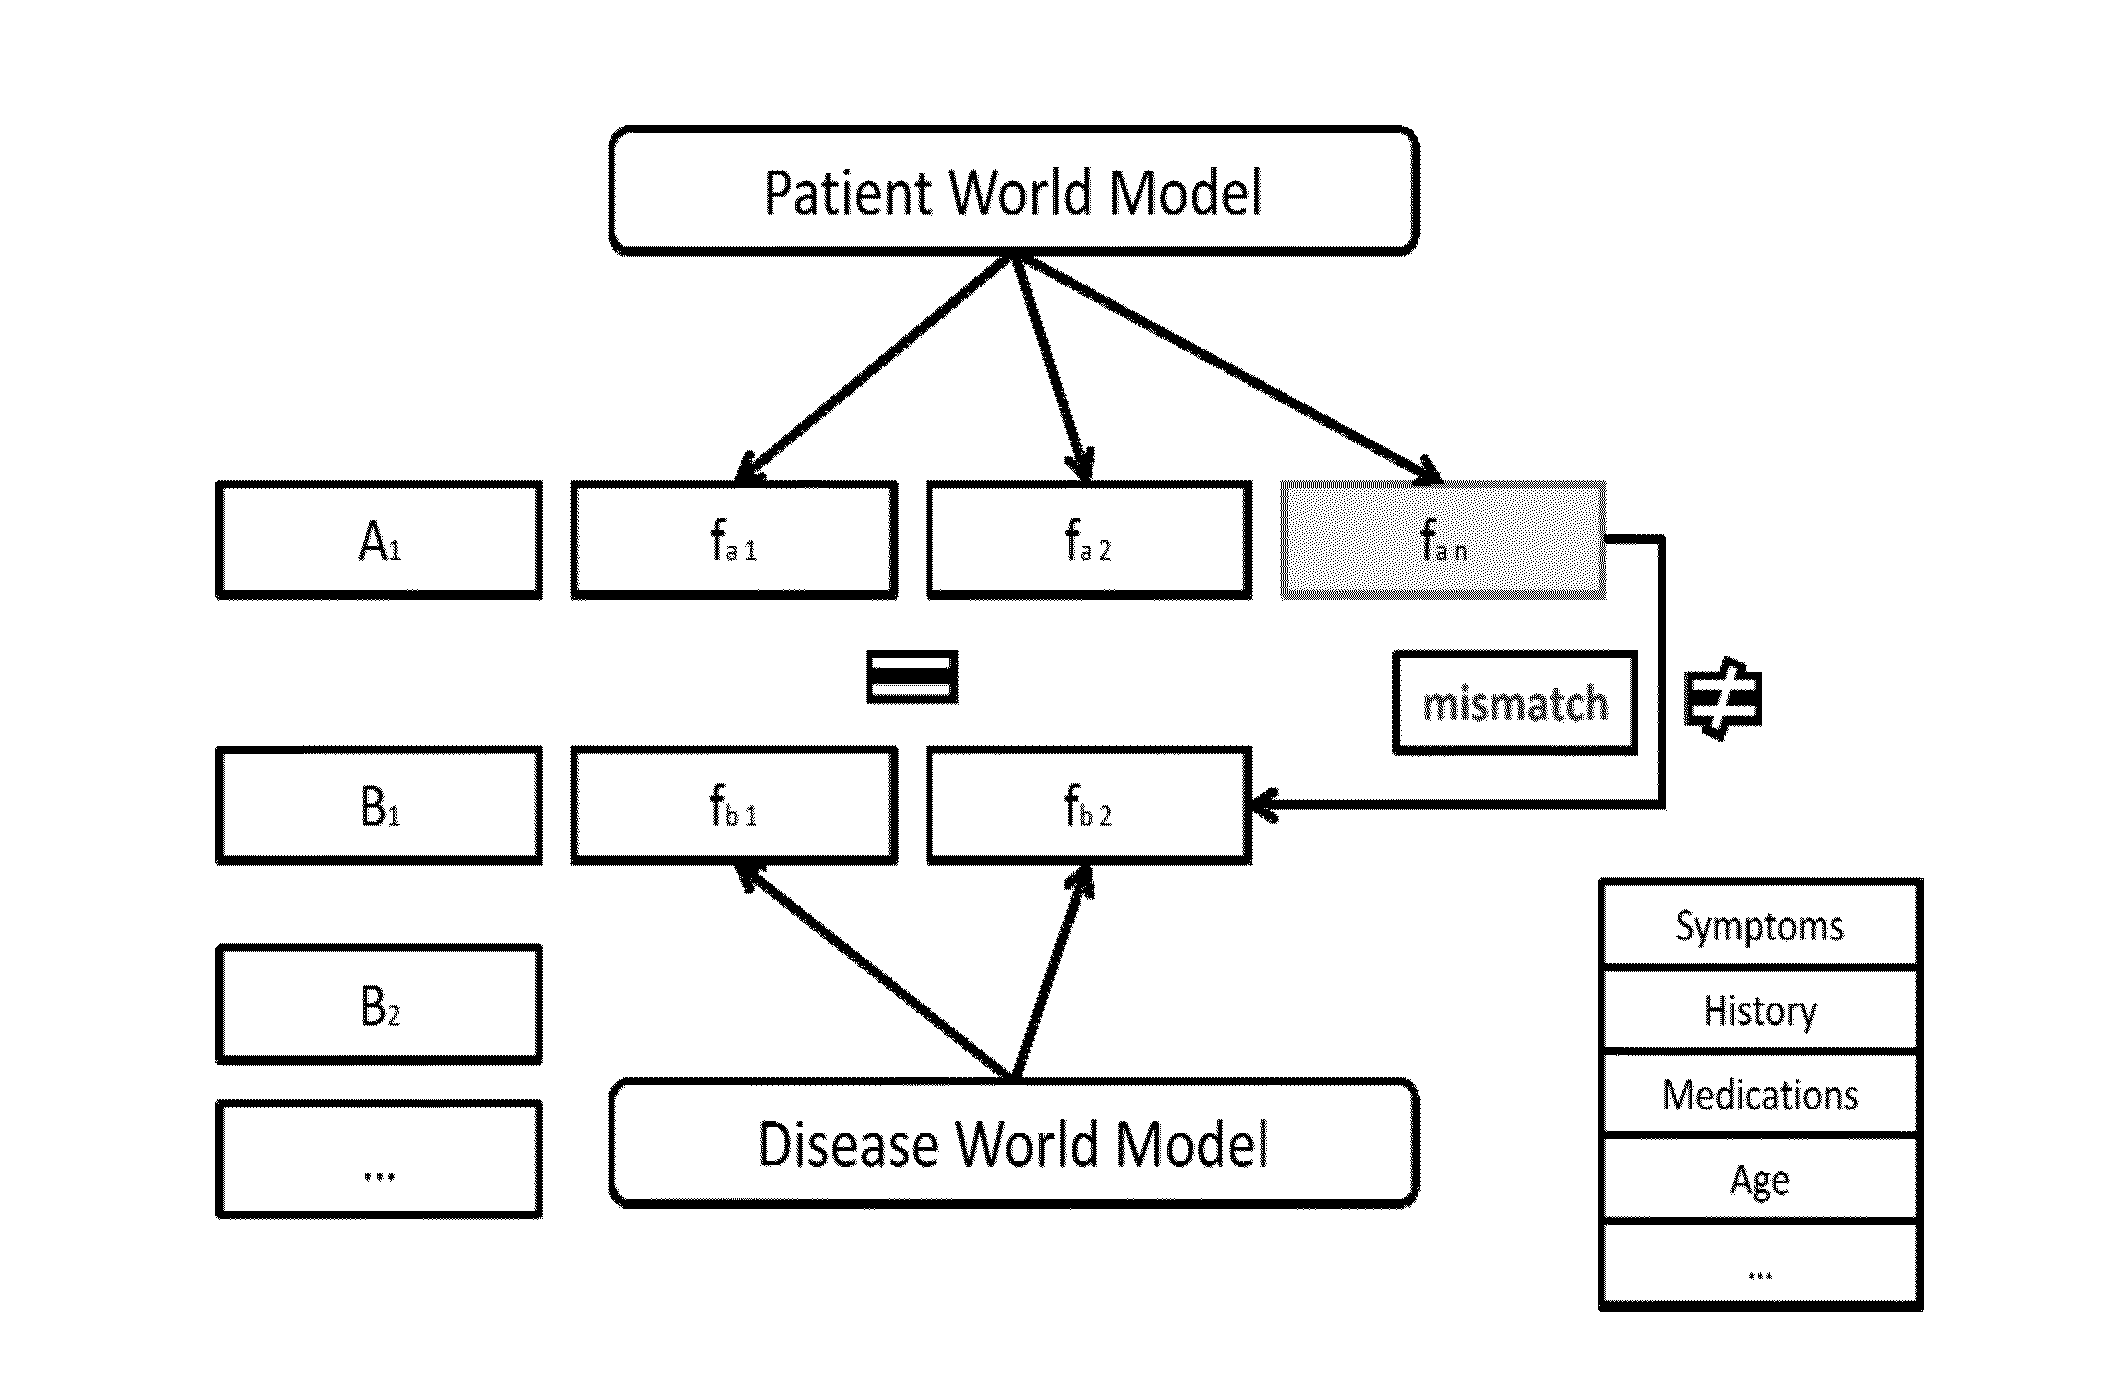 Method and System for Supporting a Clinical Diagnosis